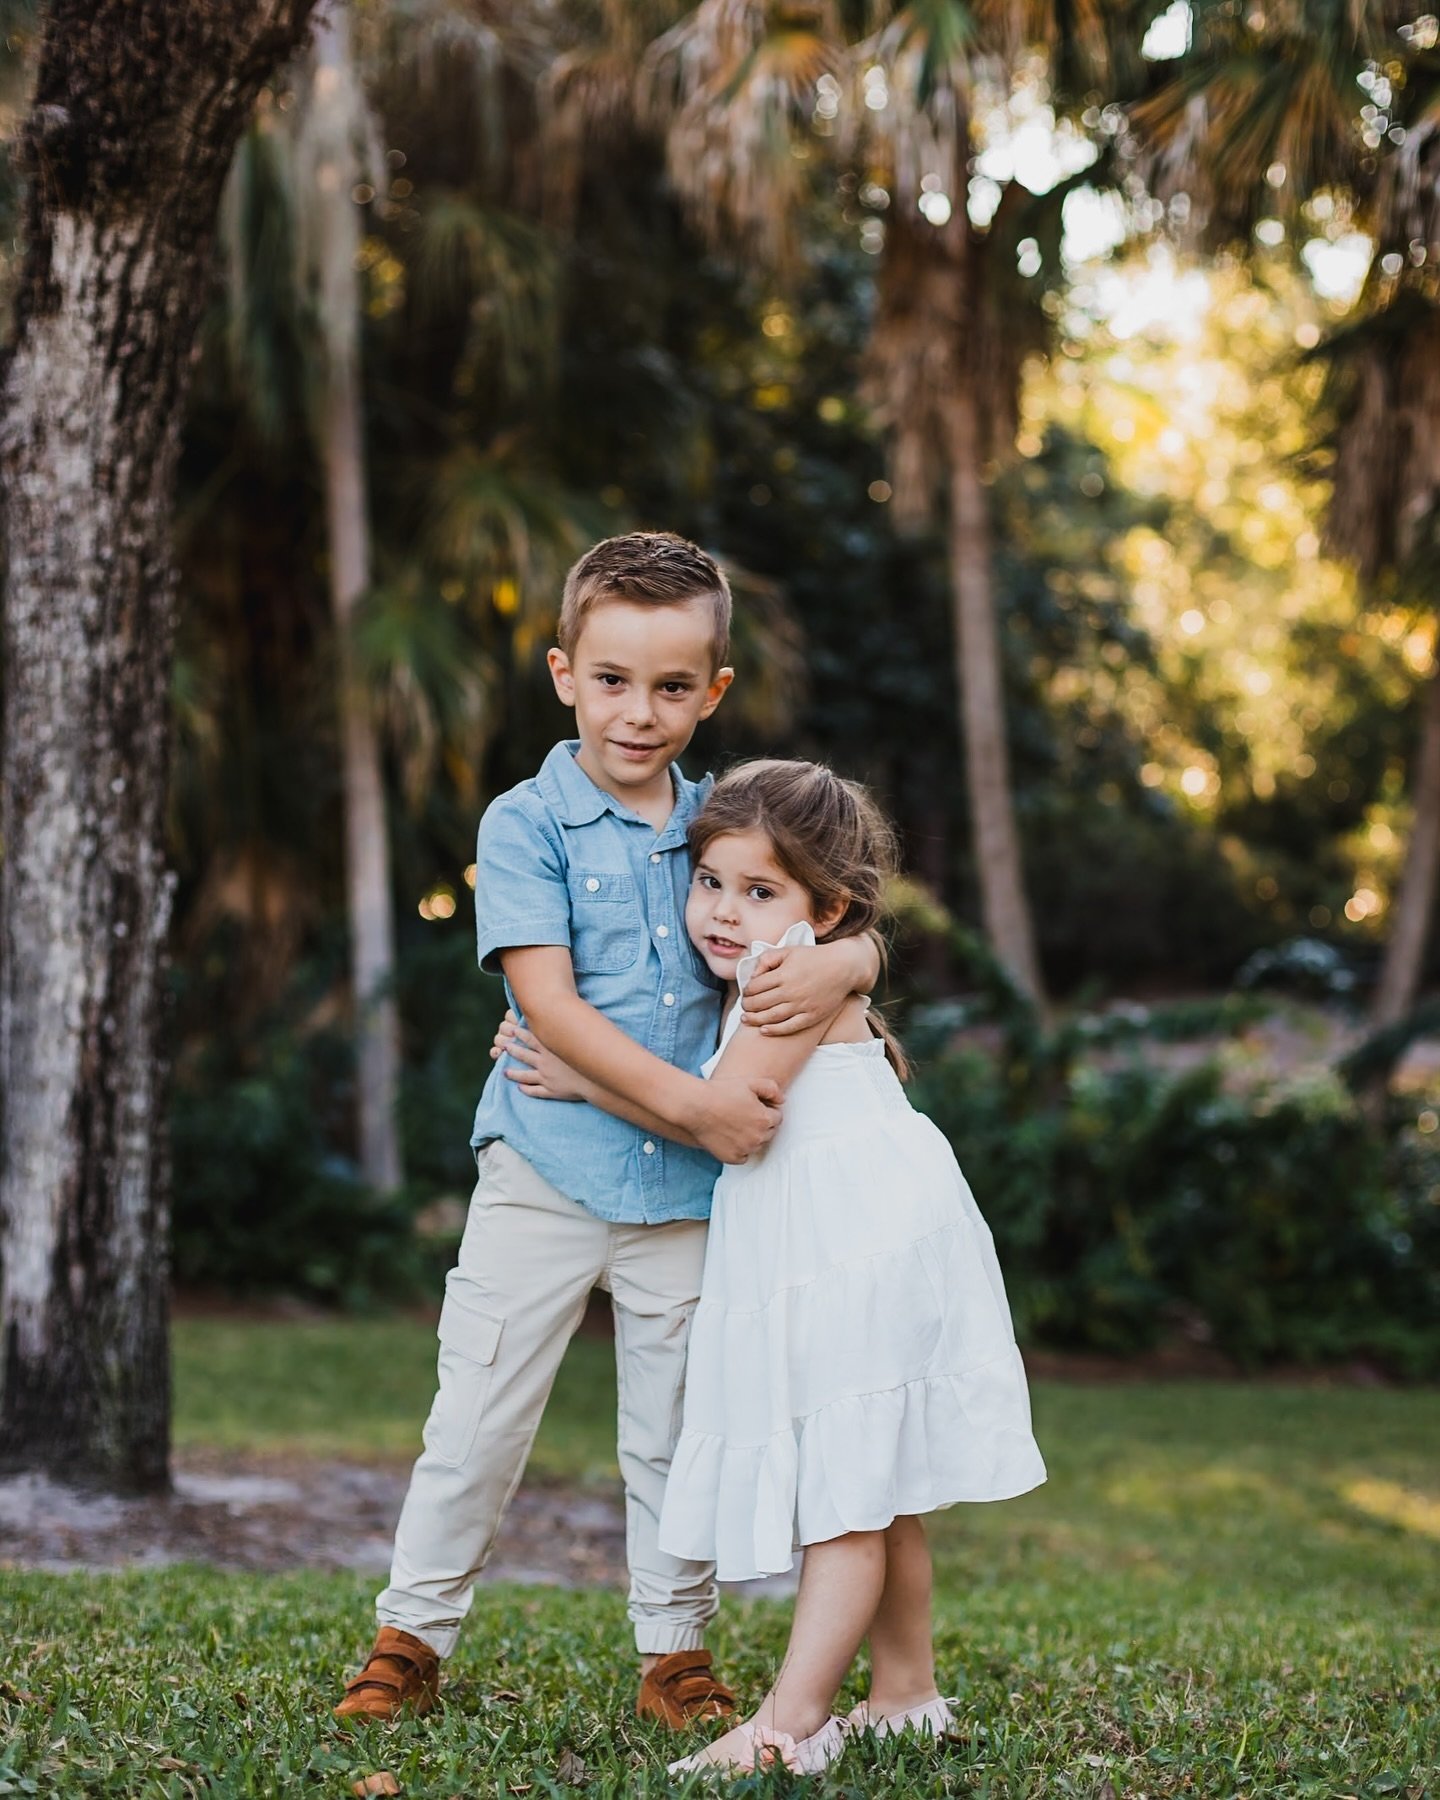 Spring minis are wrapping up this weekend but family photo sessions are ramping up.

You don&rsquo;t need to wait until fall the get family pictures! There&rsquo;s always so much to do that season. Spring has beautiful flowers and the weather is stil